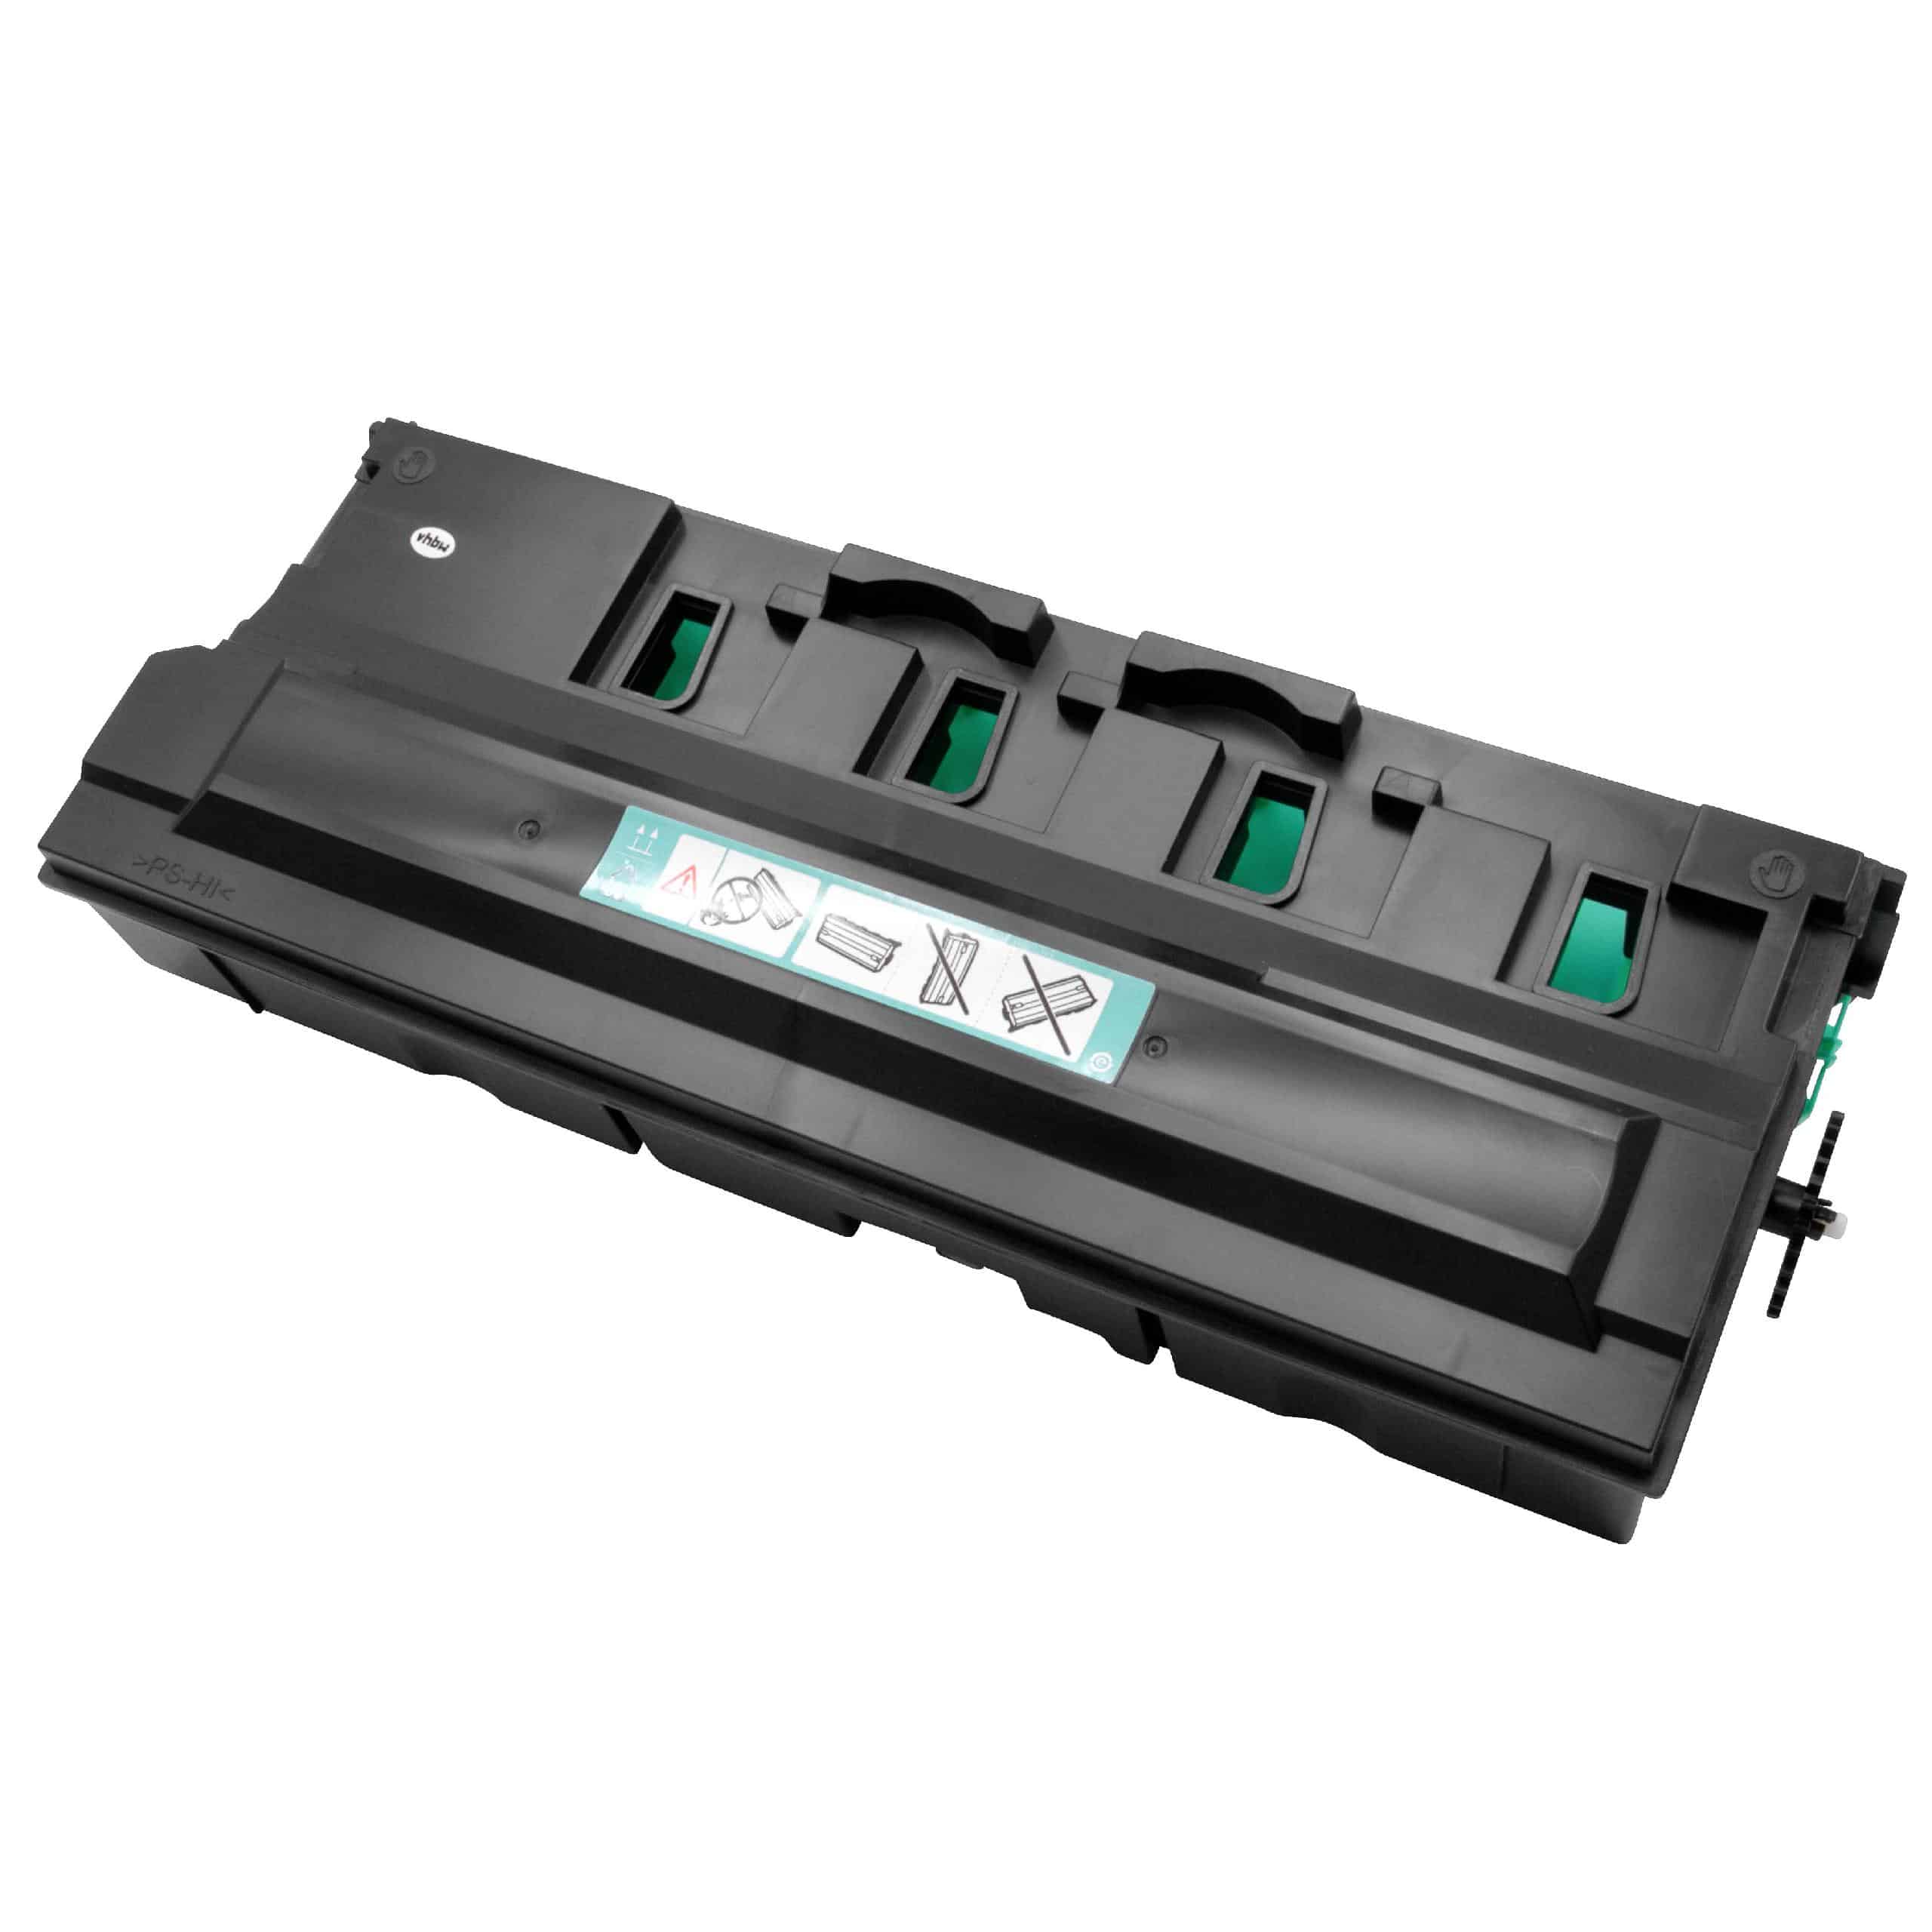 Waste Toner Container as Replacement for Konica Minolta WX-103, A4NN-WY3, A4NN-WY1 - Black